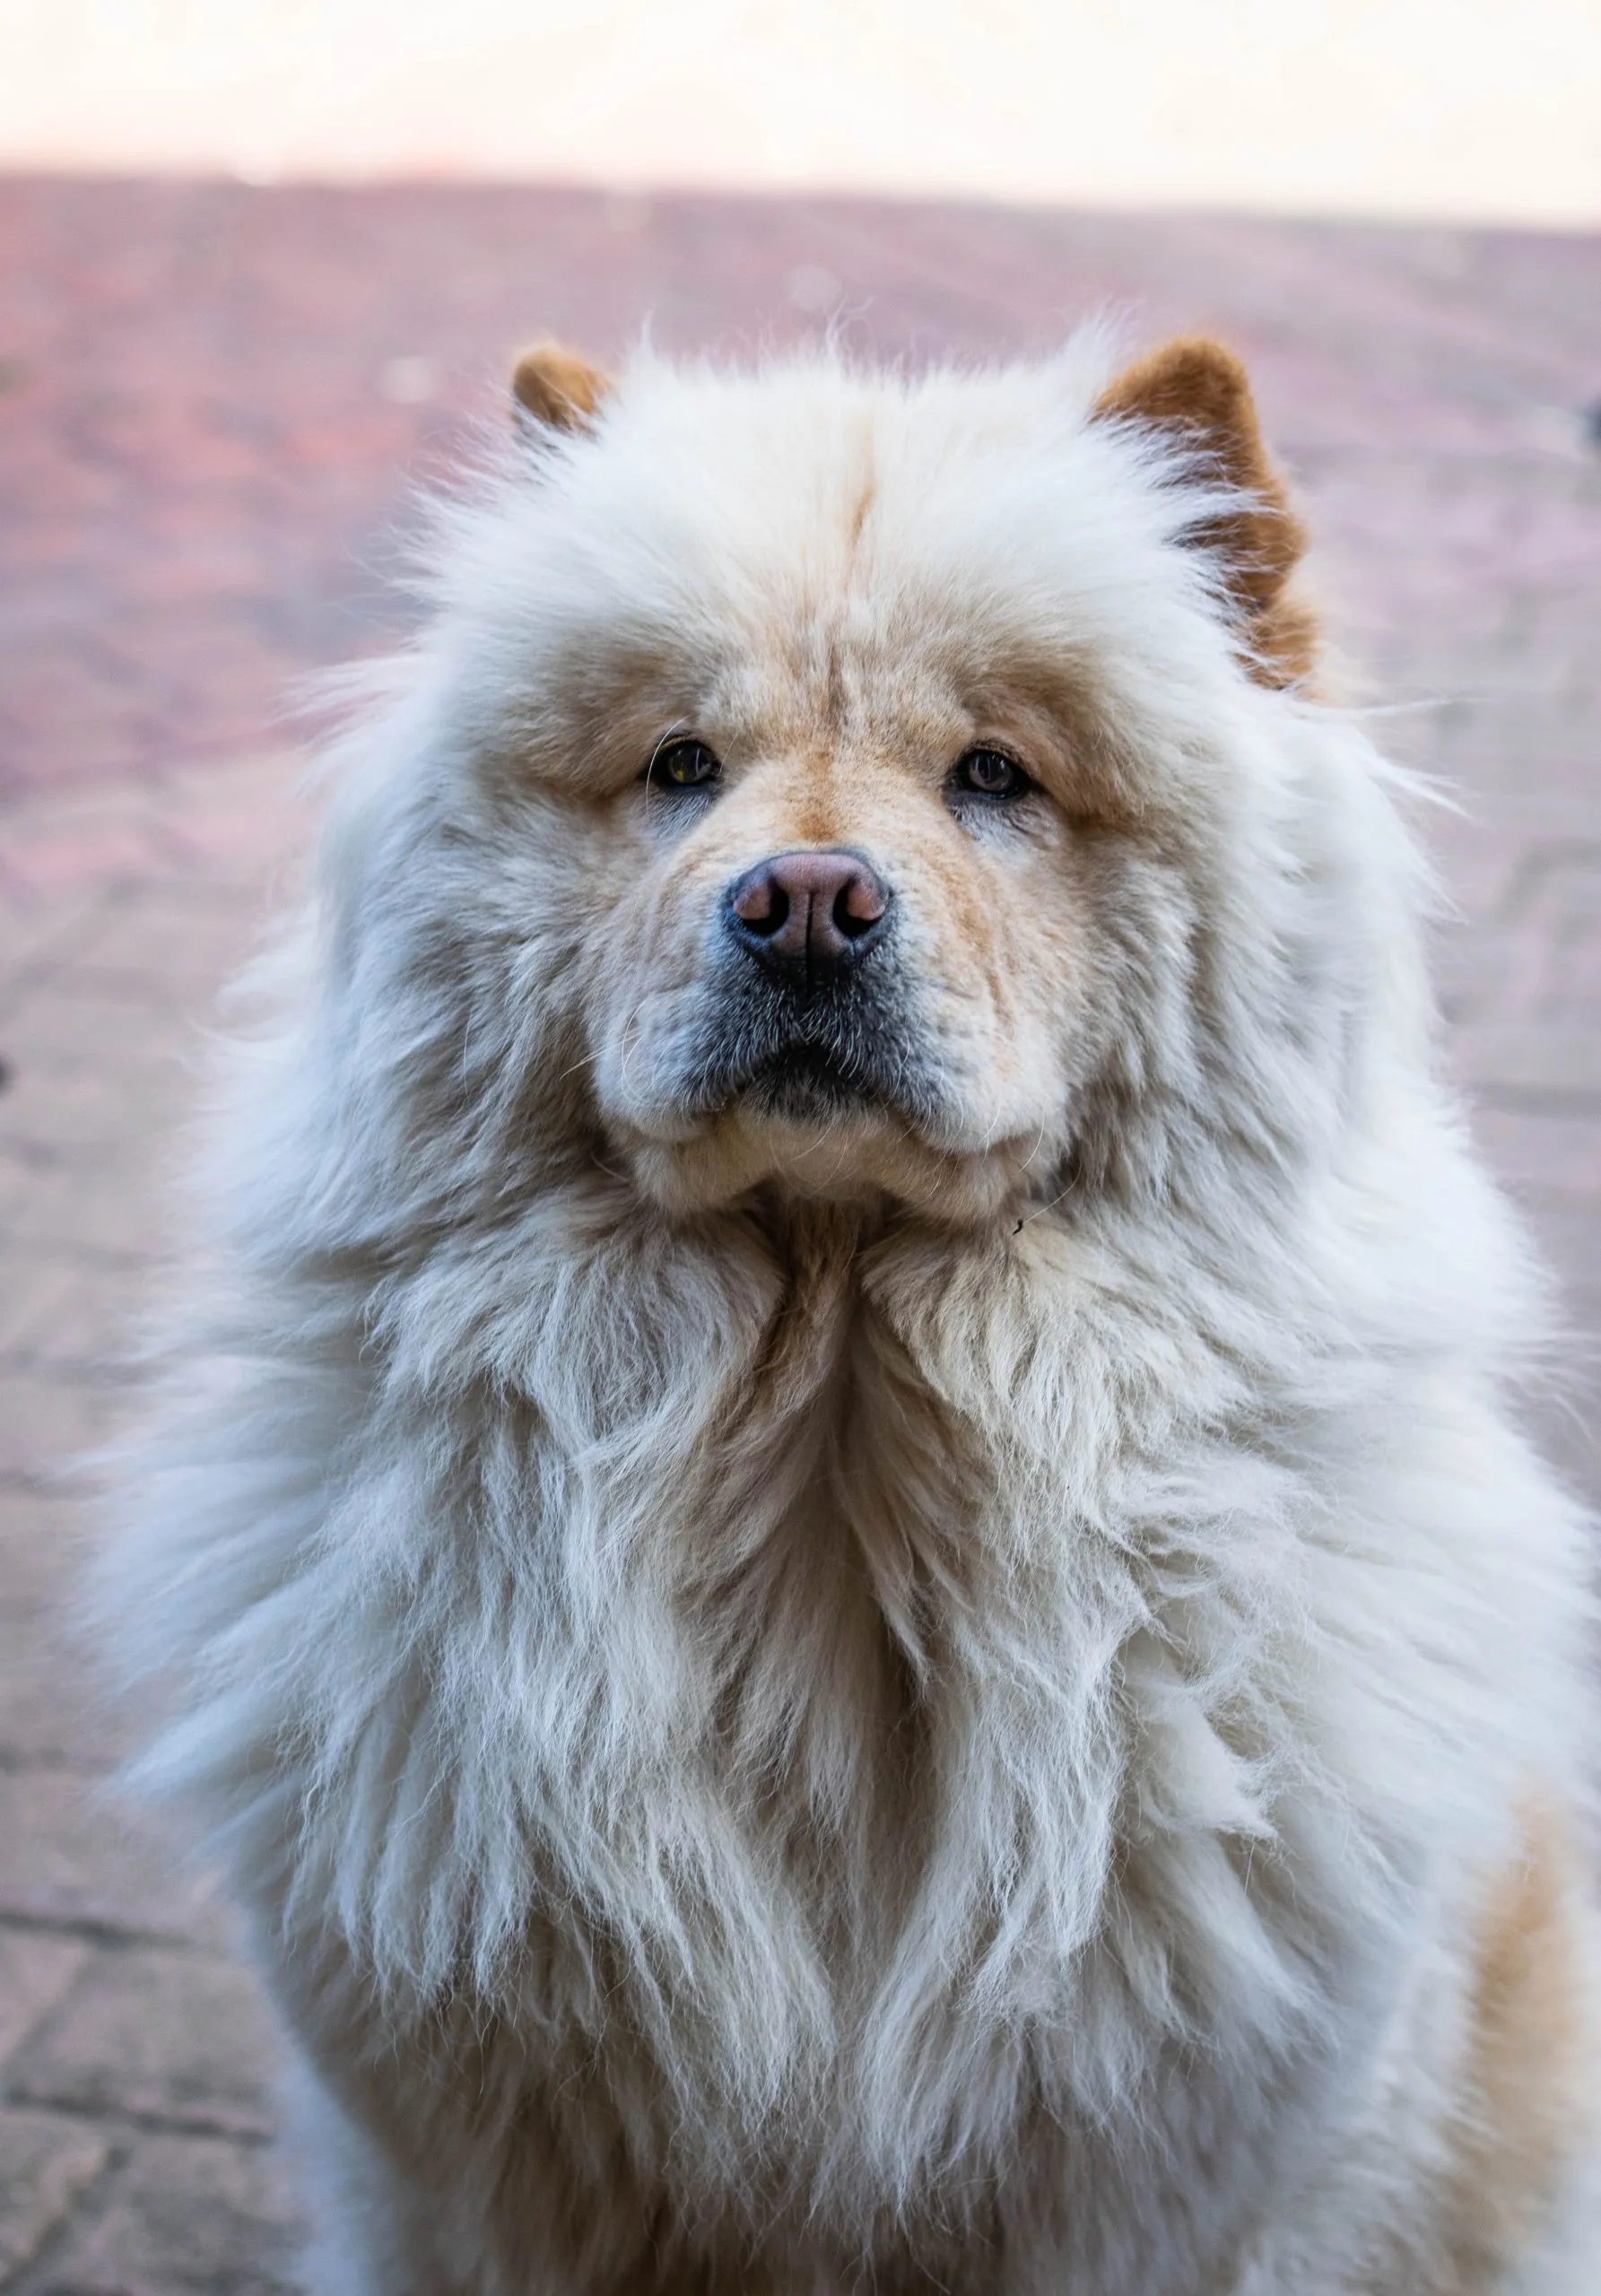 16 Dogs That Look Like Lions - Hey, Djangles.